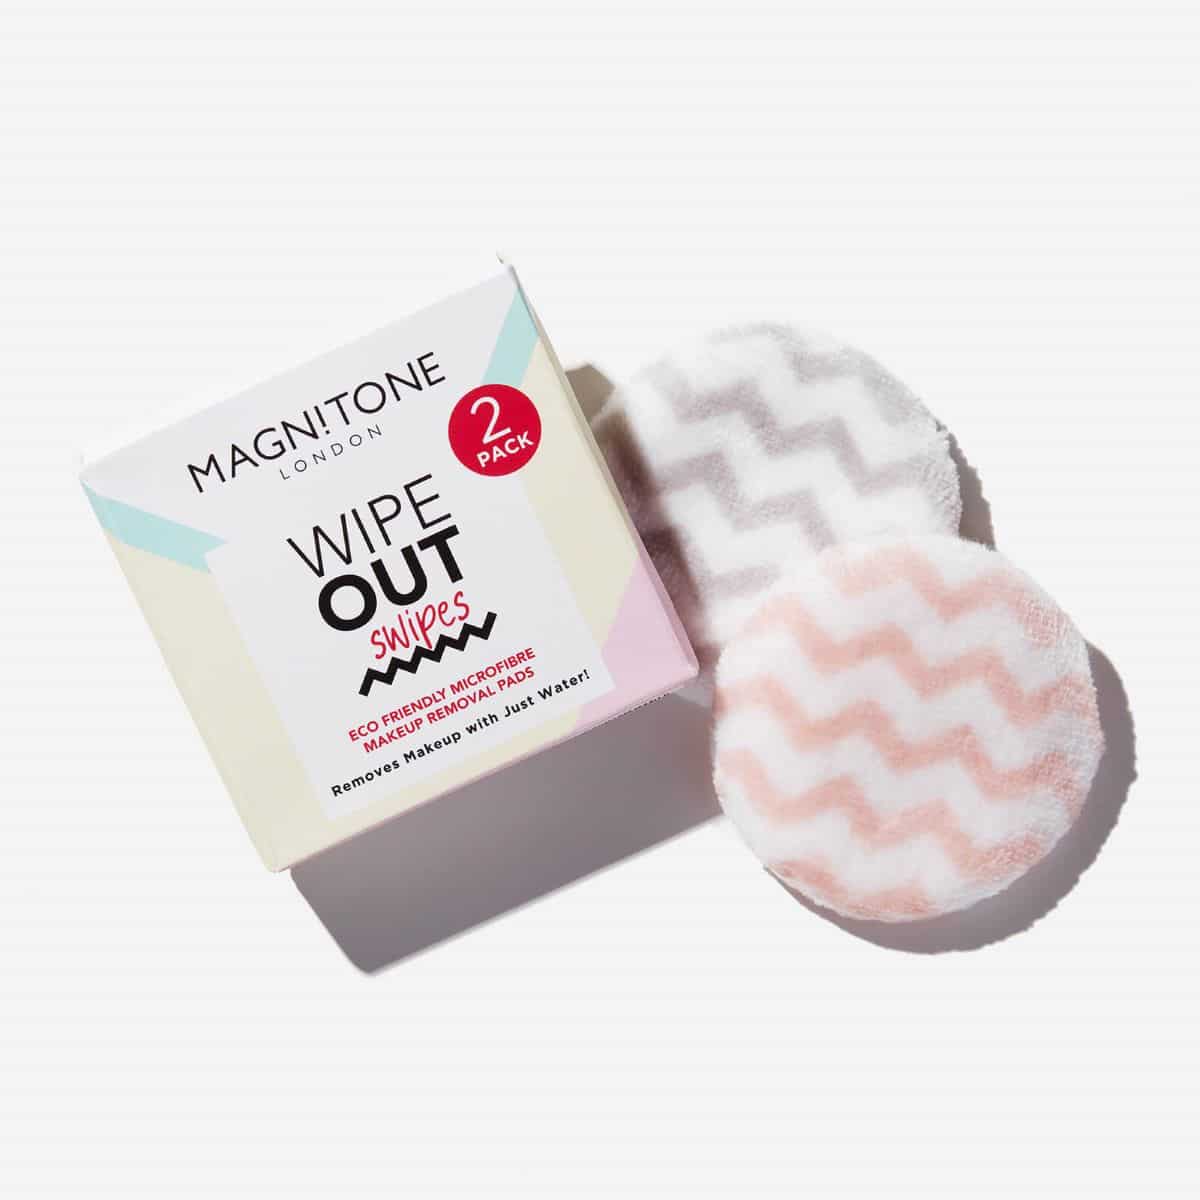 Magntone London Wipeout ‘Swipes Eco Friendly Makeup Remover Pads 2 pack